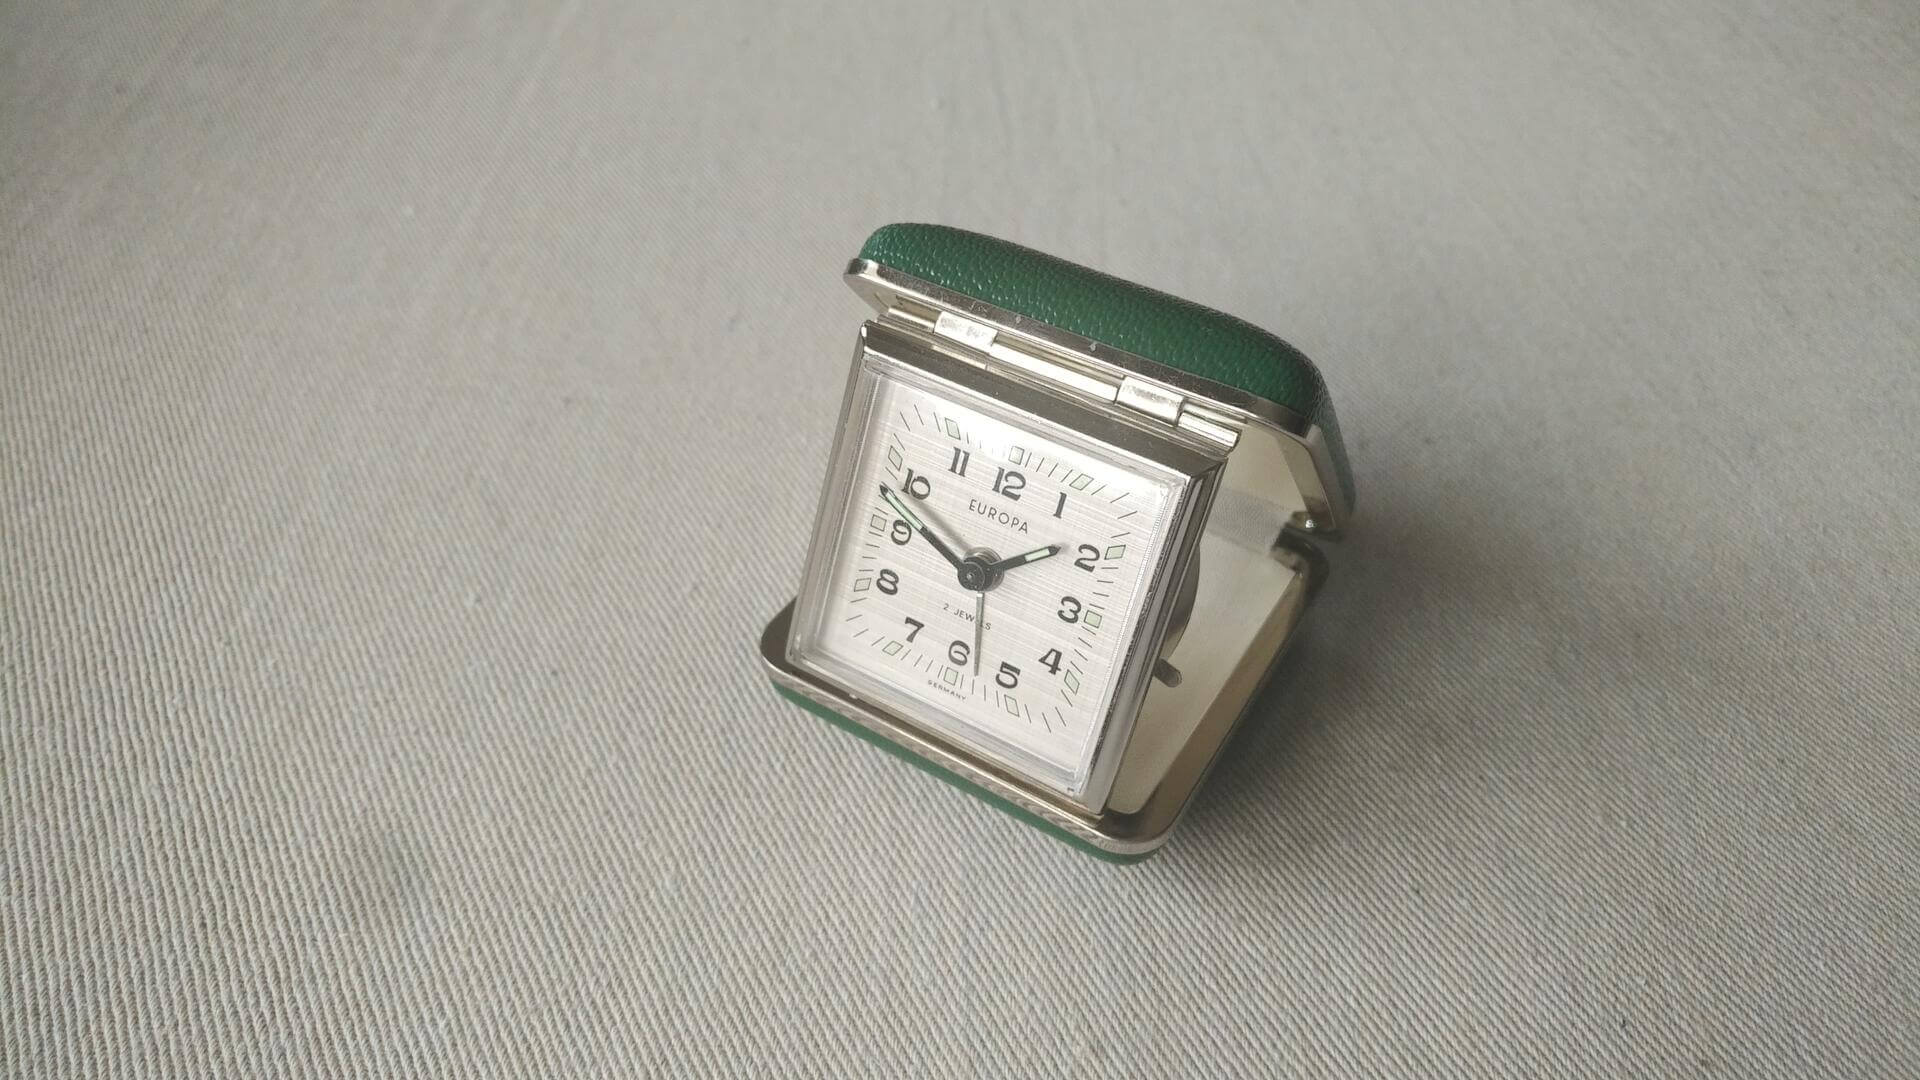 Vintage solid steel mechanical Europa 2 jewel travel desk alarm clock in the green folding box. Antique made in Germany collectible desk watches & clocks